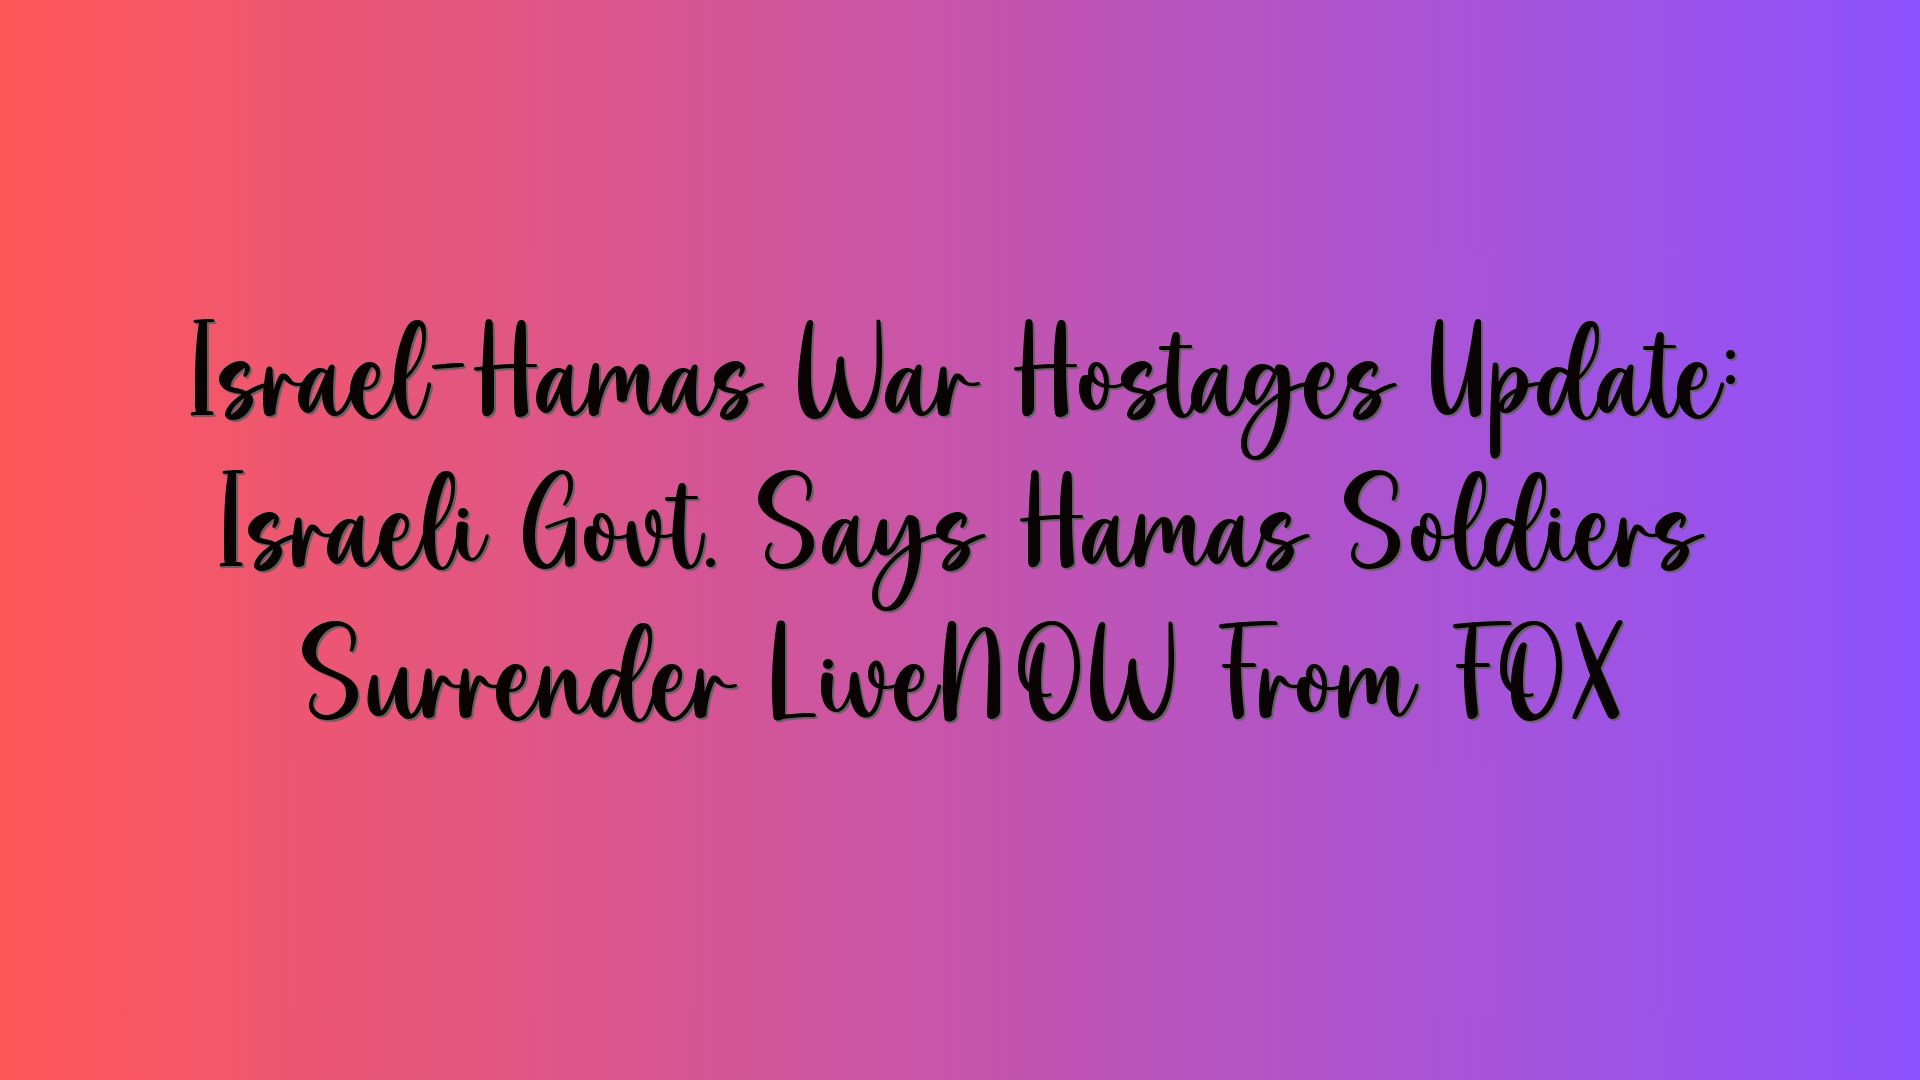 Israel-Hamas War Hostages Update: Israeli Govt. Says Hamas Soldiers Surrender LiveNOW From FOX